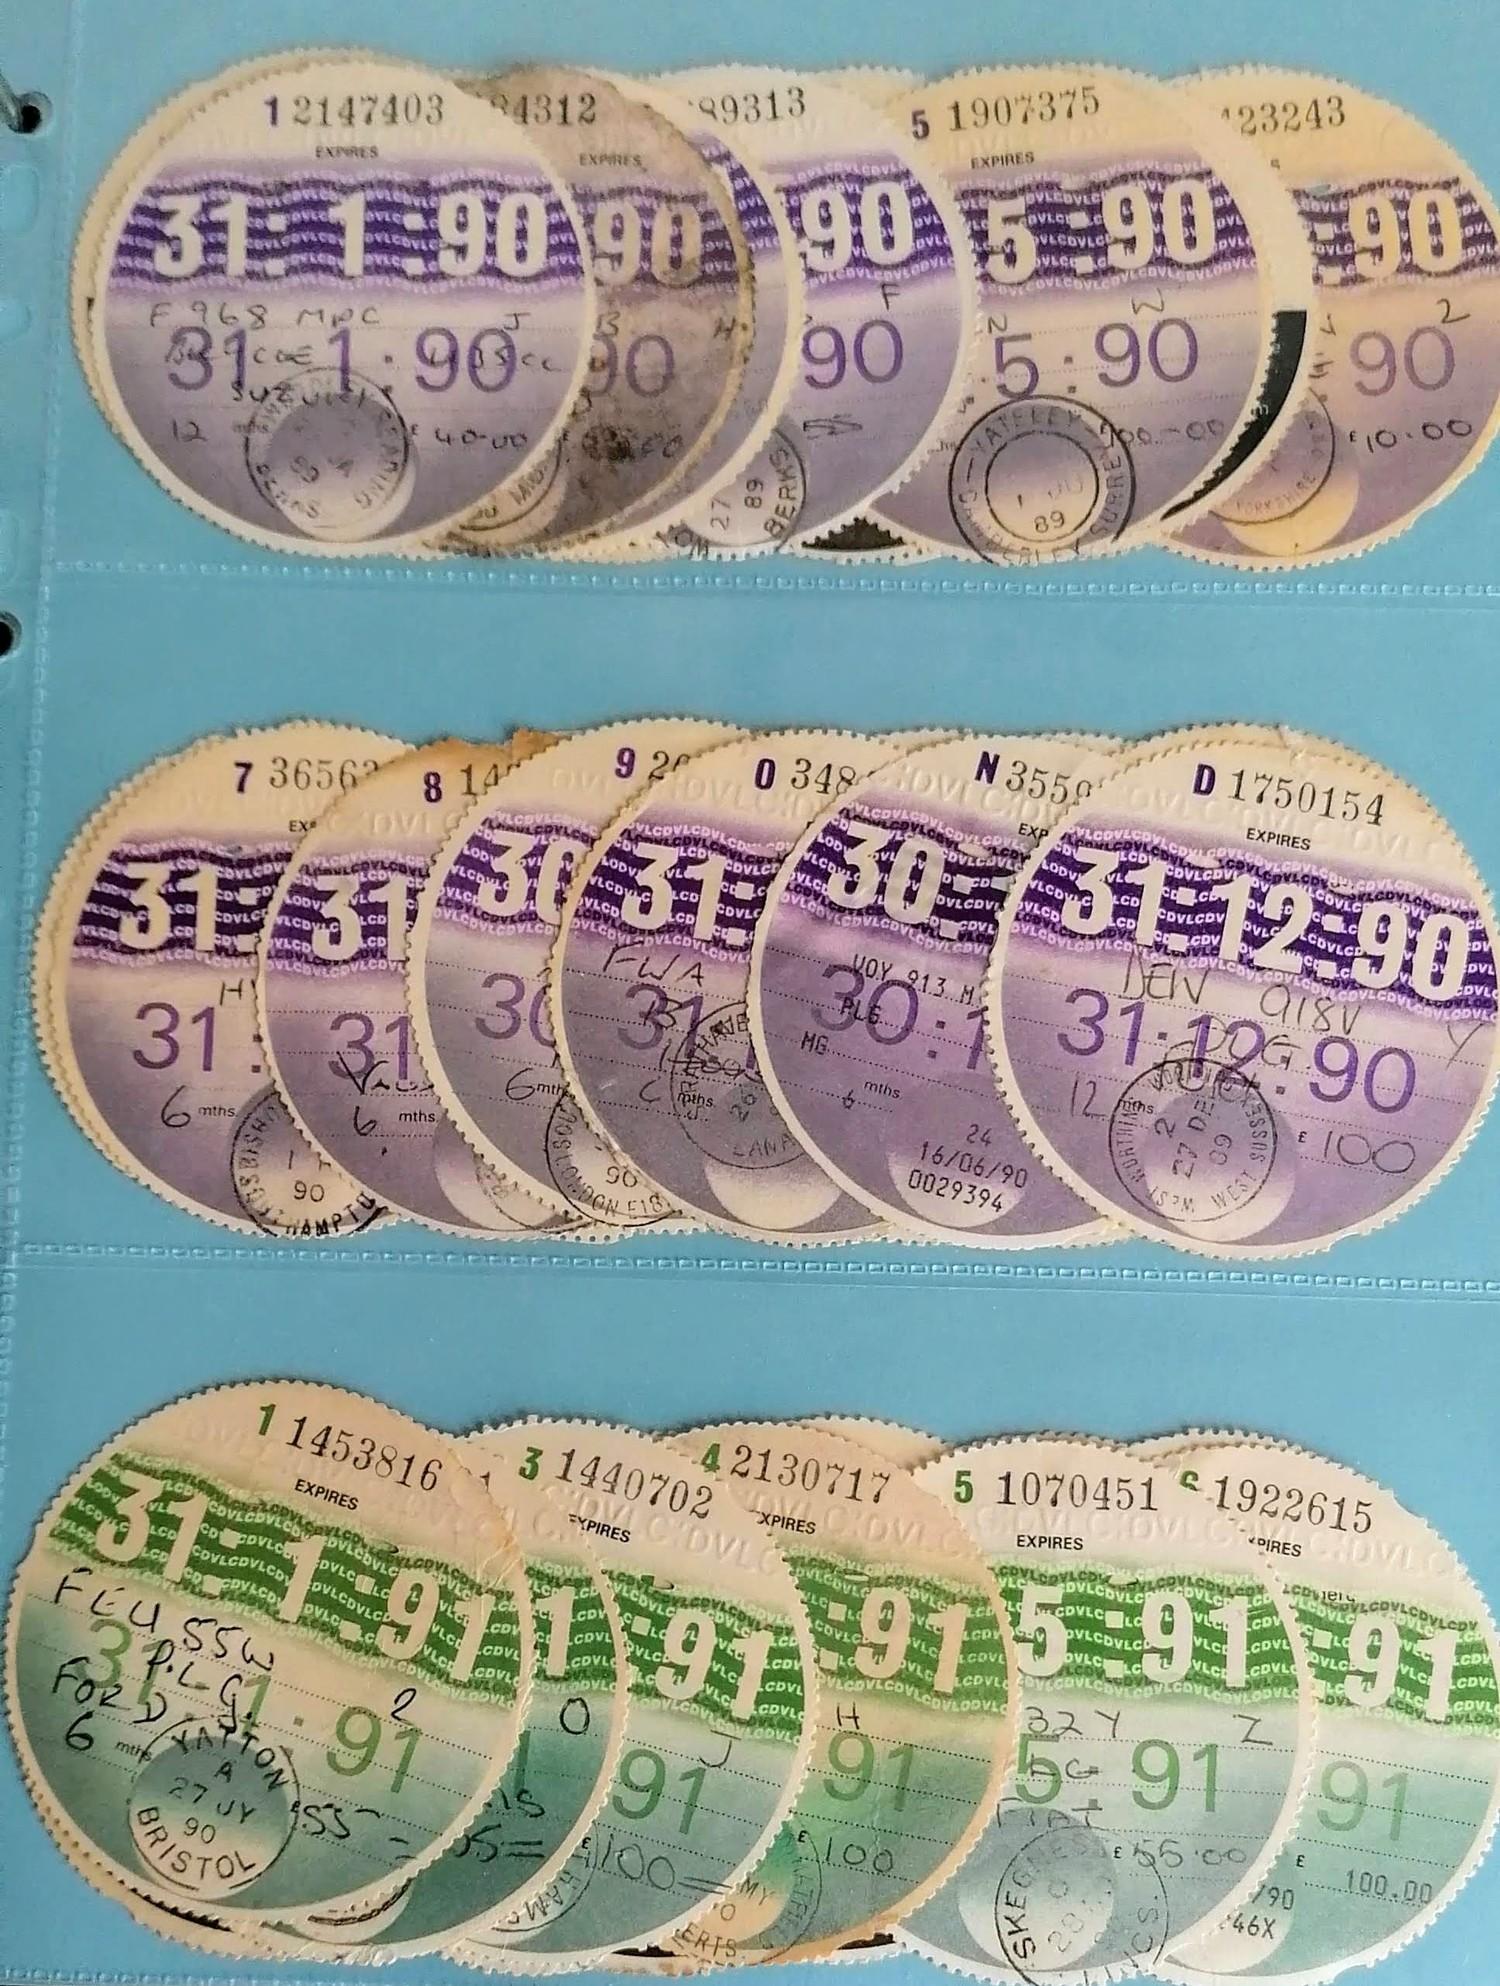 A unique and complete collection of over 5,023 original British vehicle Tax Discs from 1921 to 2015 - Image 11 of 33